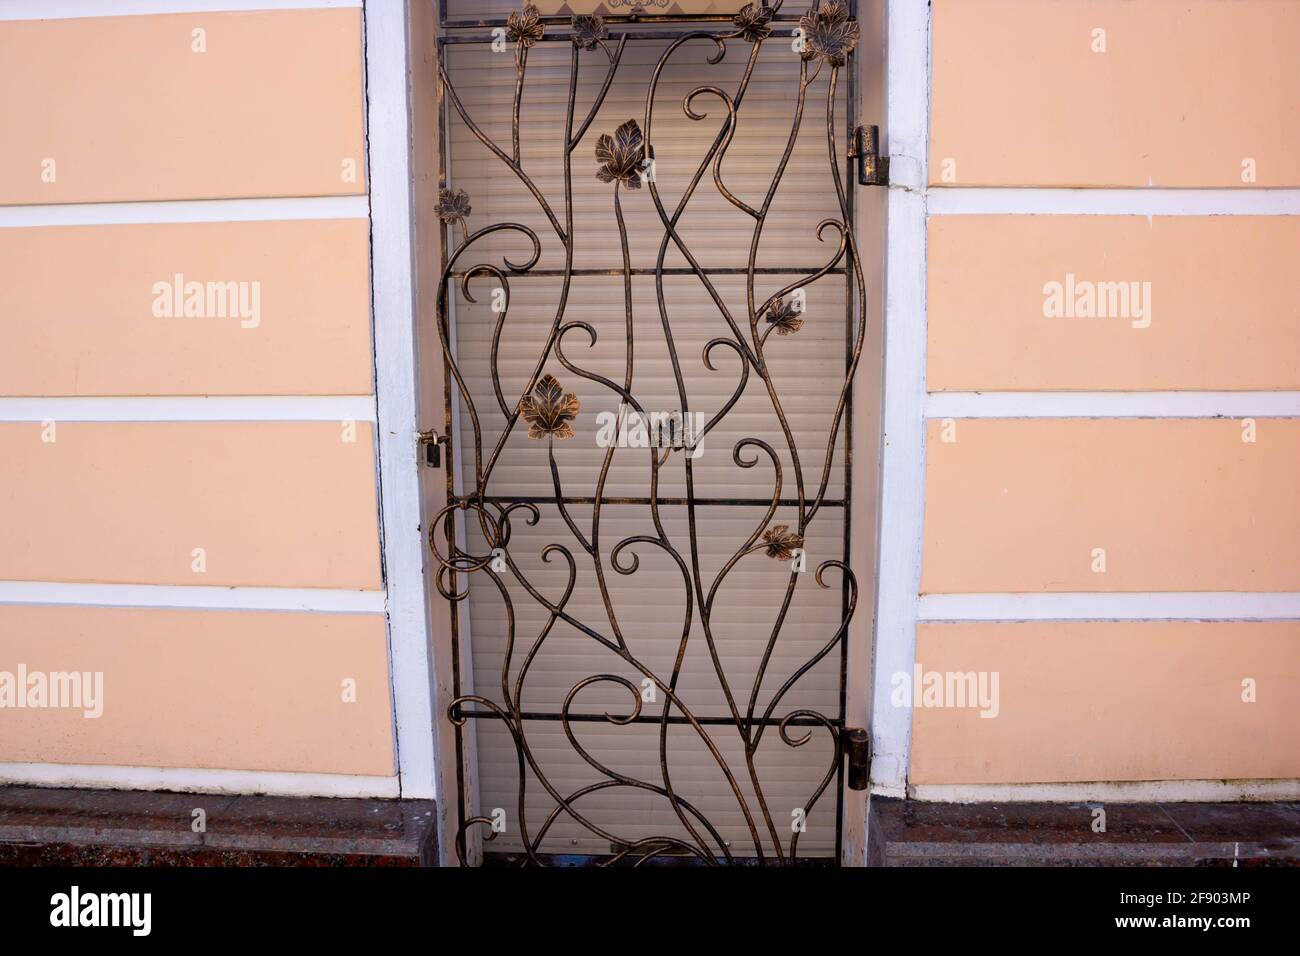 Decorative elements of buildings, old cast-iron wrought-iron grilles on doors and gates. Stock Photo